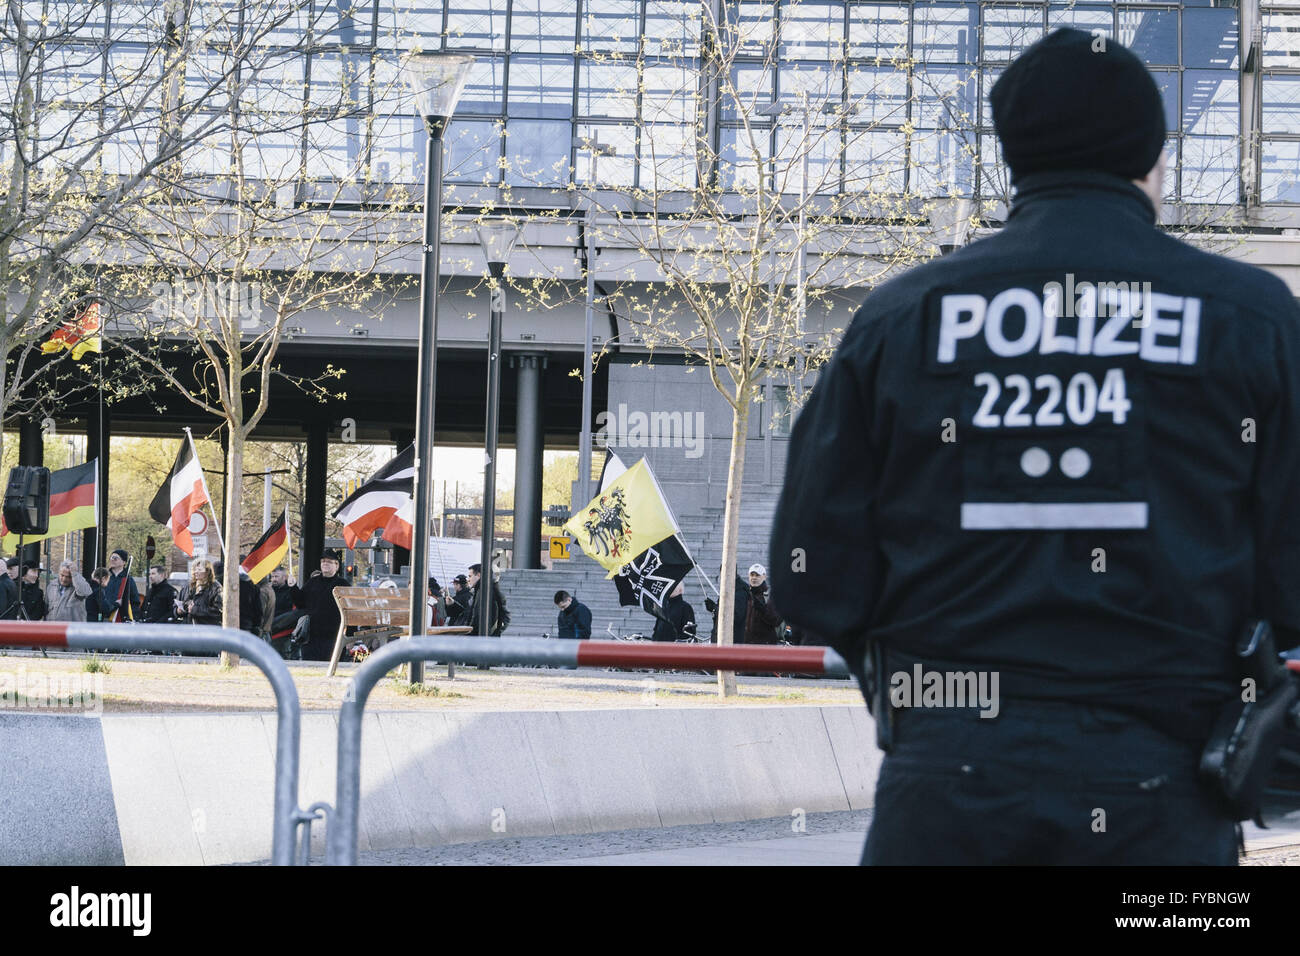 Berlin, Berlin, Germany. 25th Apr, 2016. Protesters during the right-wing Baergida Rally in front of Berlin Central Station. Baergida, an Anti-Islamic, anti-immigration, far-right movement meet for the 69th time since their first rally in January 2015. © Jan Scheunert/ZUMA Wire/Alamy Live News Stock Photo